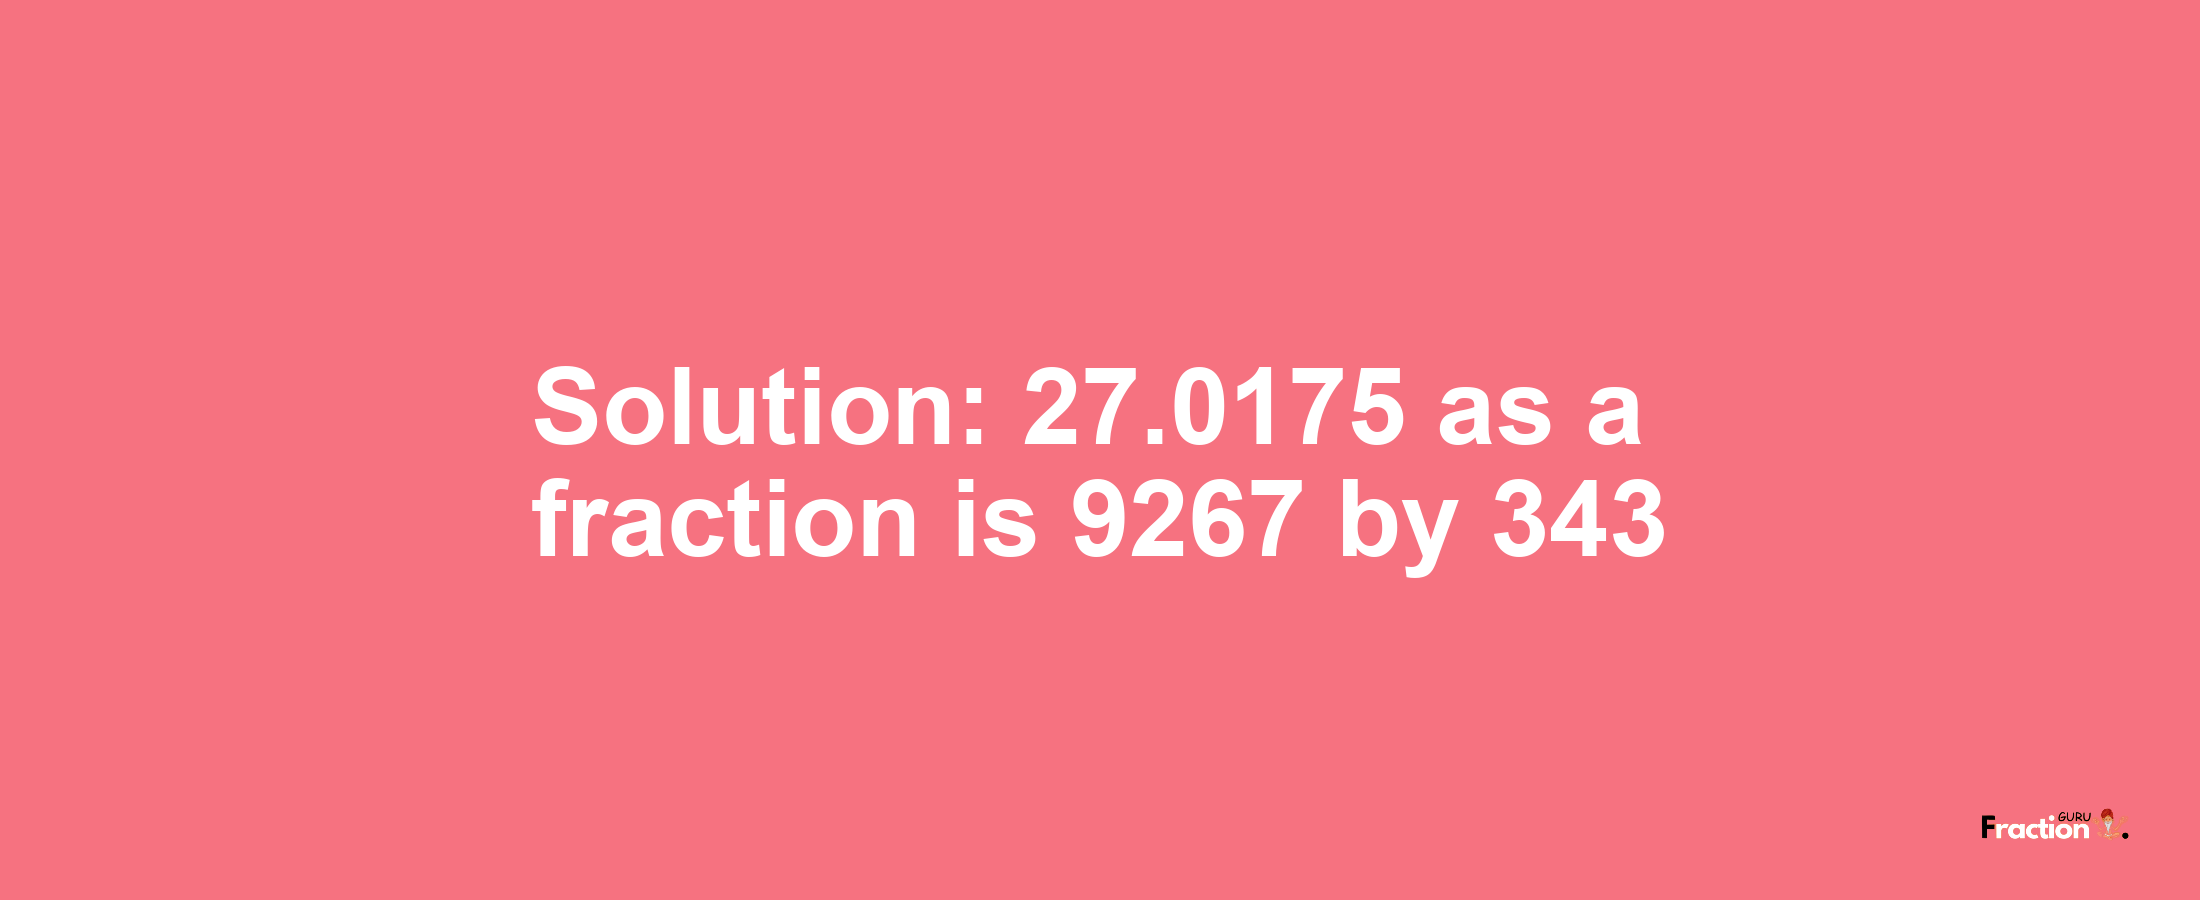 Solution:27.0175 as a fraction is 9267/343